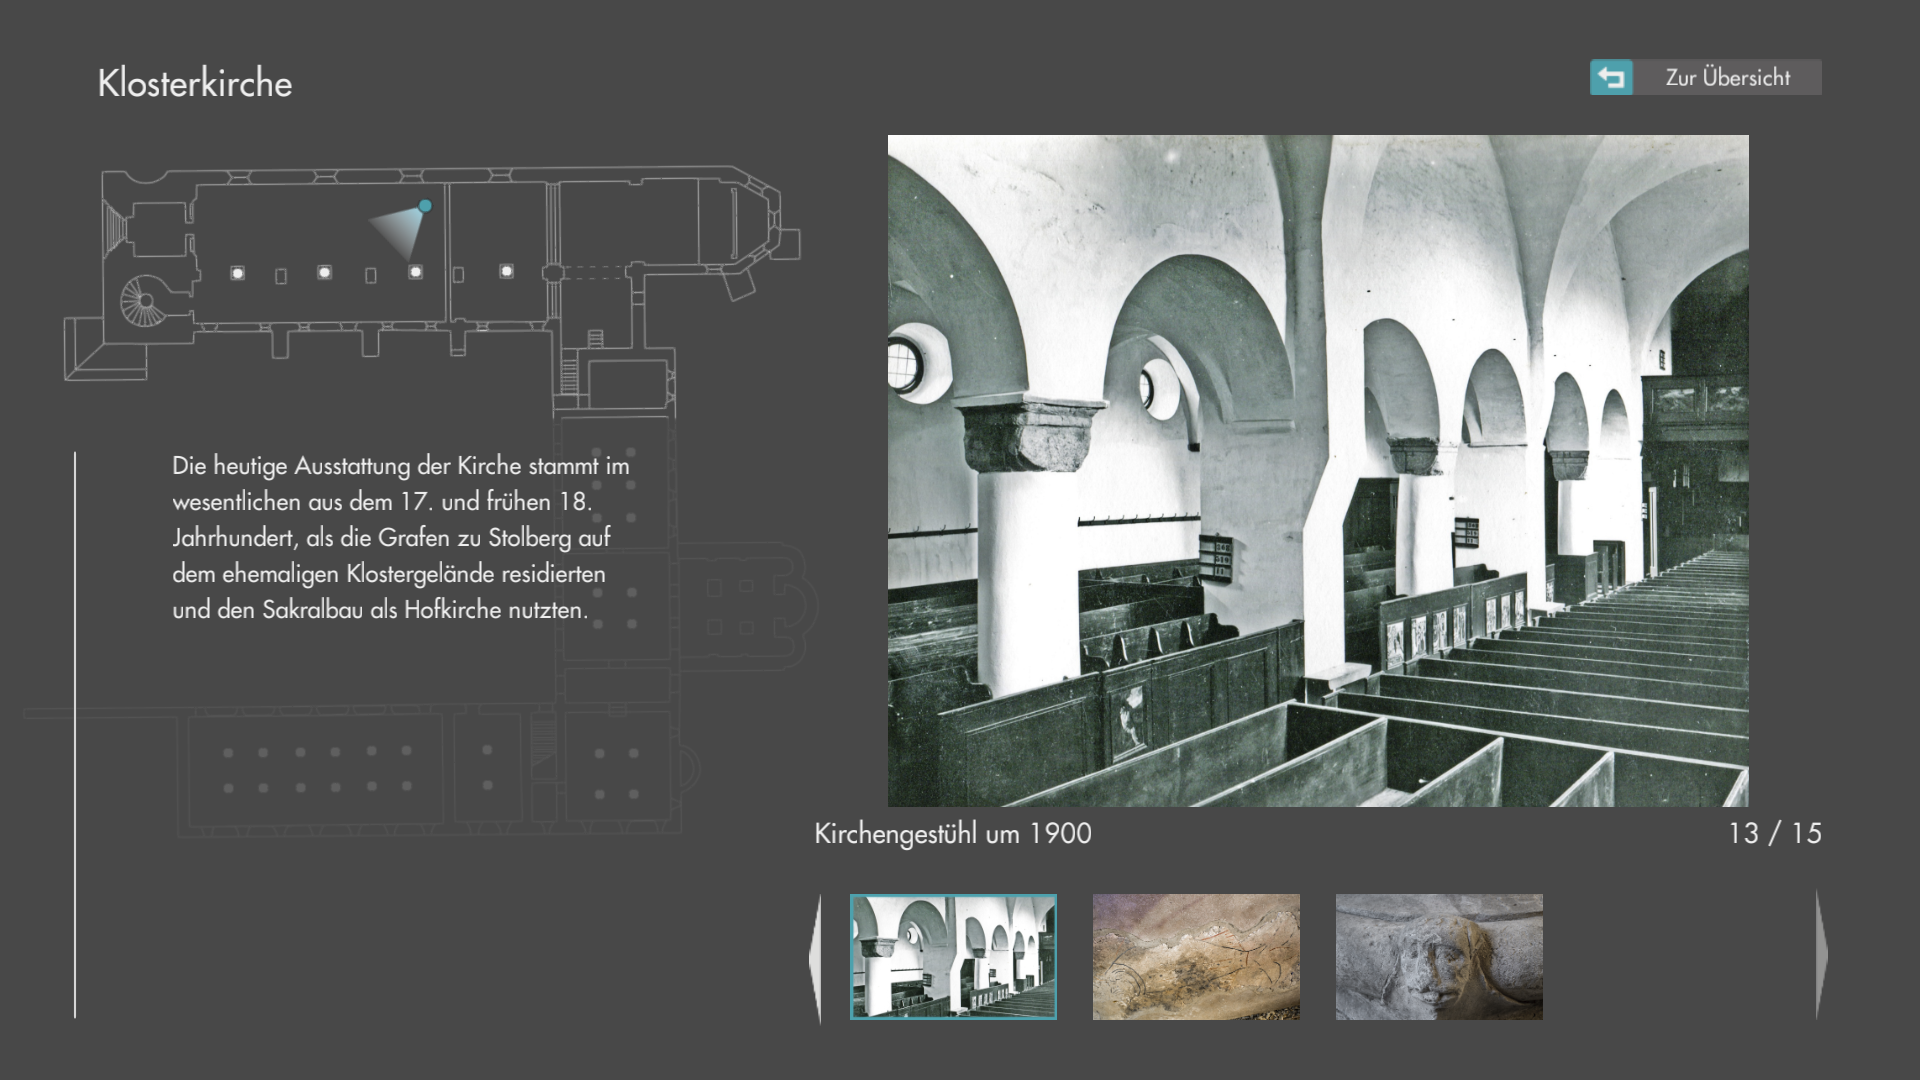 Screenshot of the Ilsenburg Abbey application that shows the image gallery for the 'Klosterkirche'. The image is on the right side of the screen and shows the church around the year 1900. Below is an image slider displaying the thumbnails of several other images. In the upper left corner a map is displayed that shows the position and rotation from where the photograph was taken. Below is a text that is associated with the image.